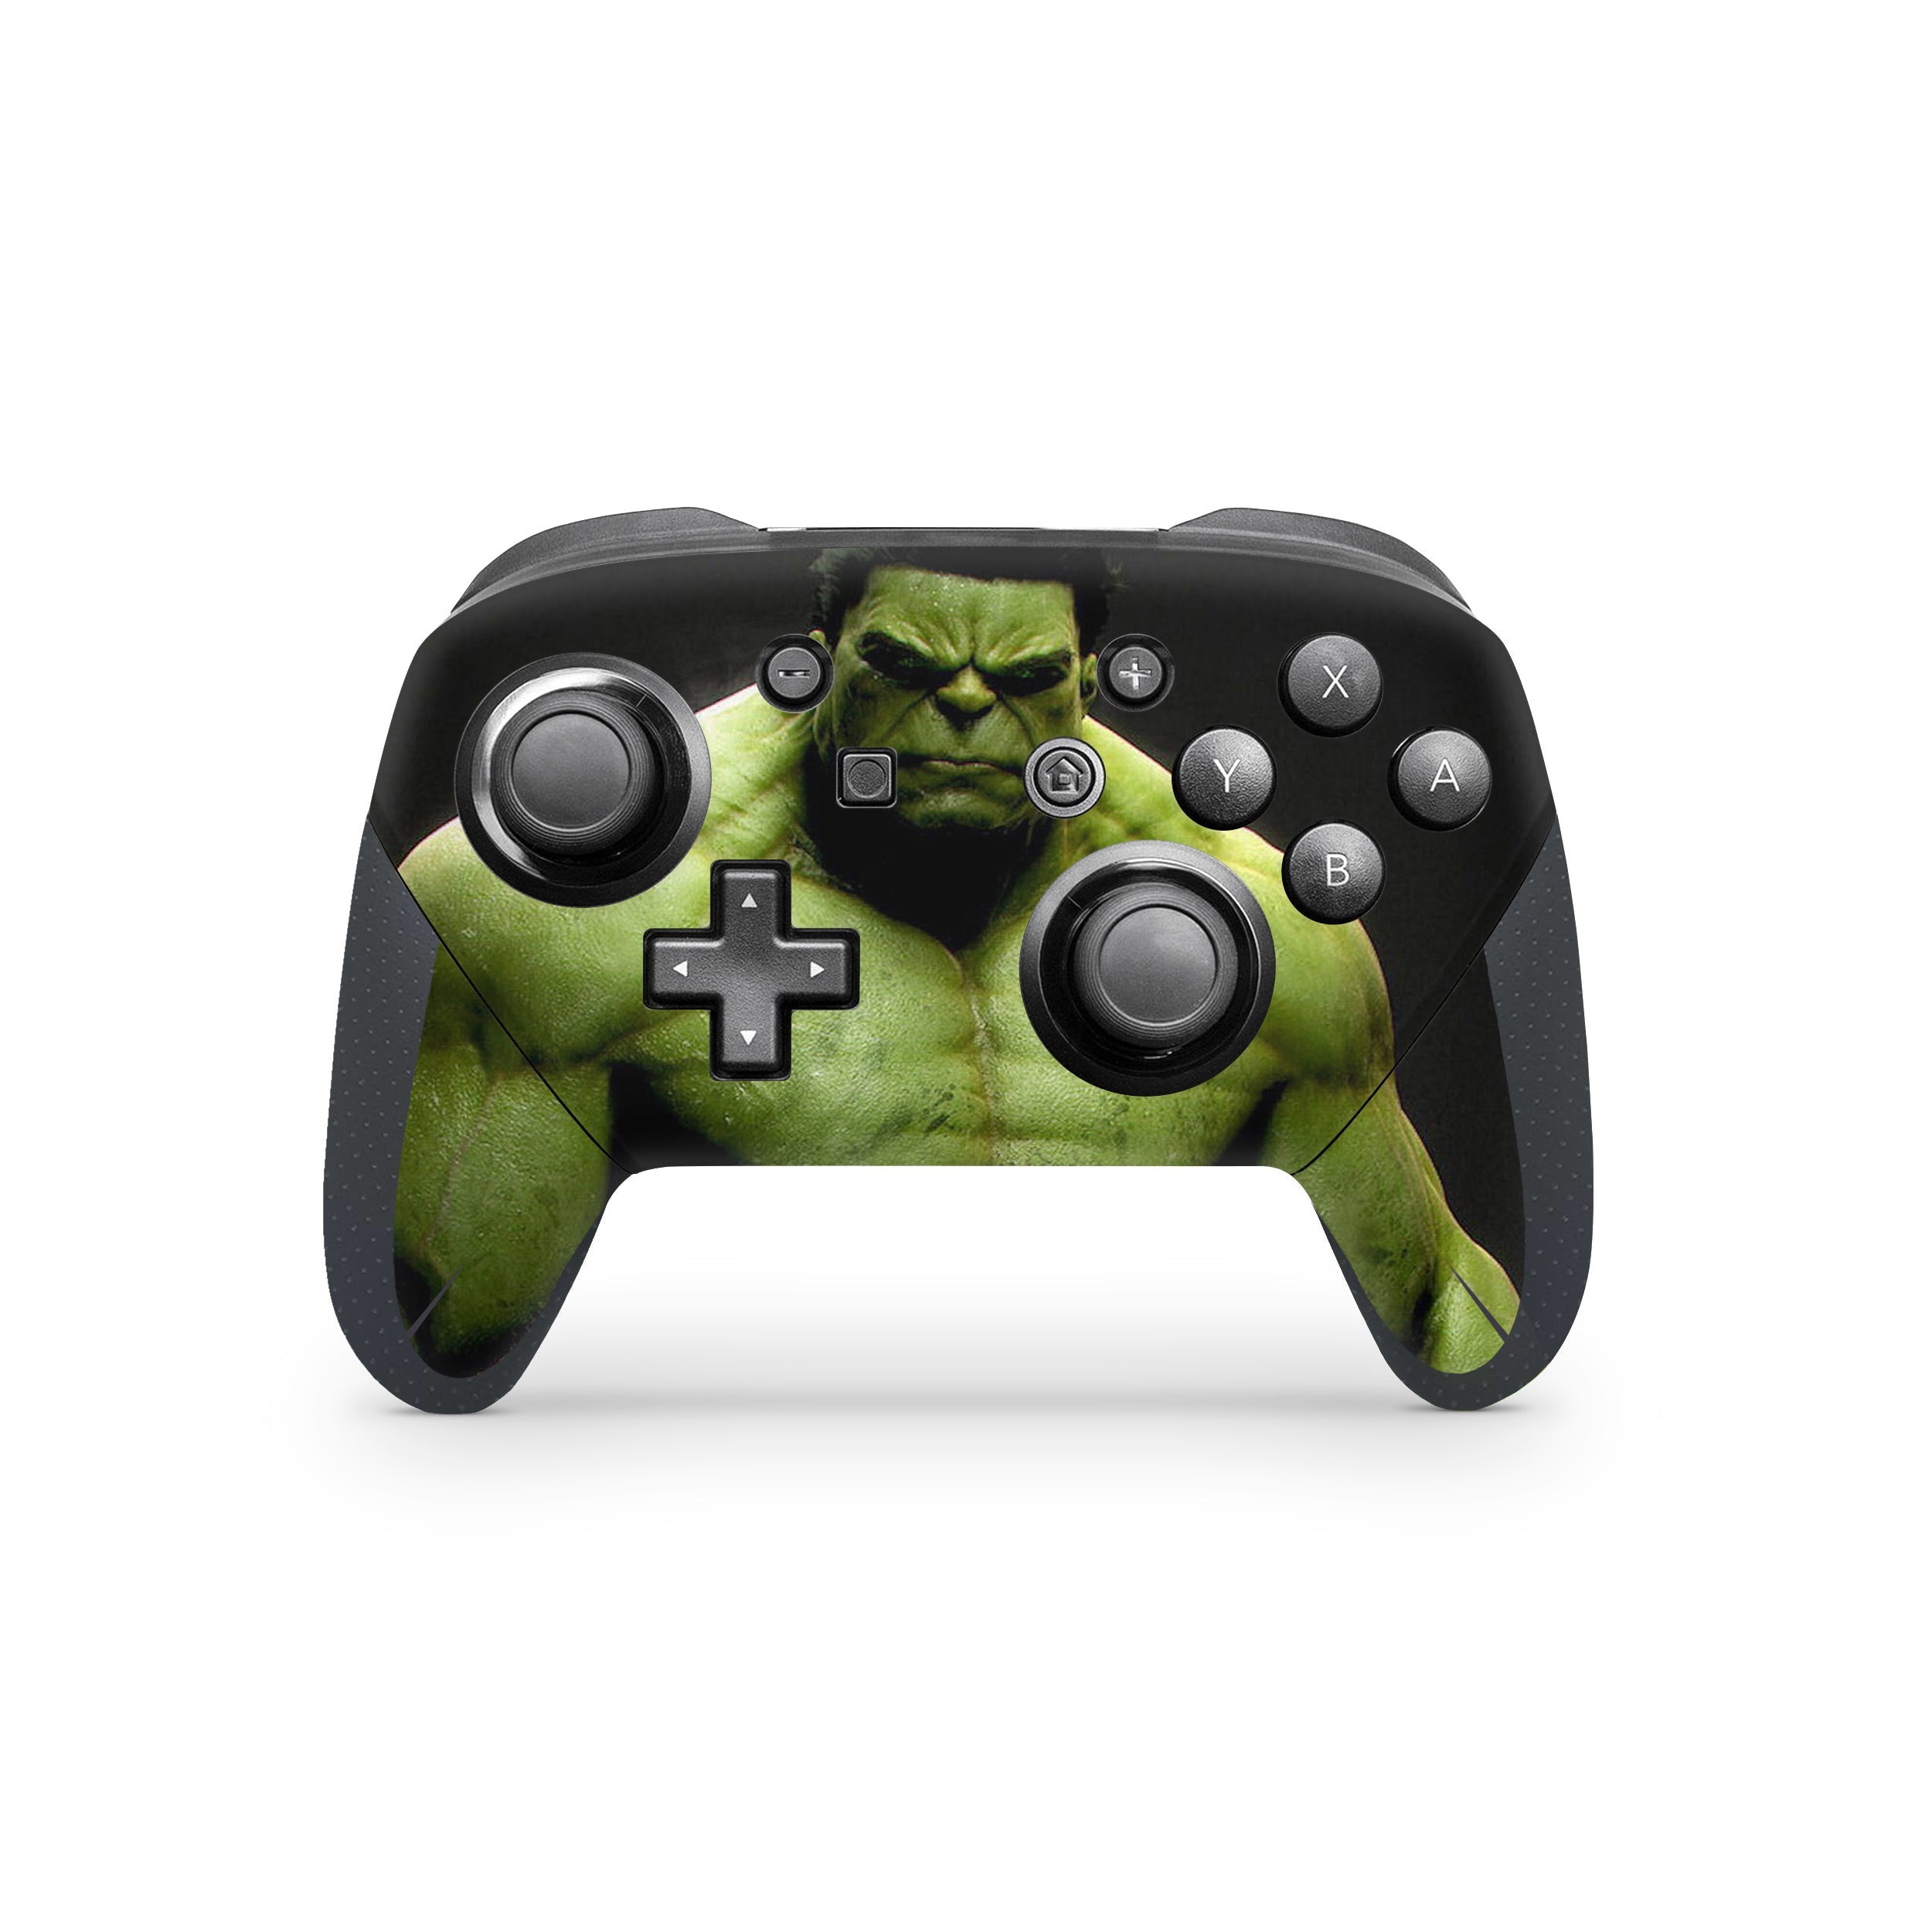 A video game skin featuring a Marvel Comics Hulk design for the Switch Pro Controller.